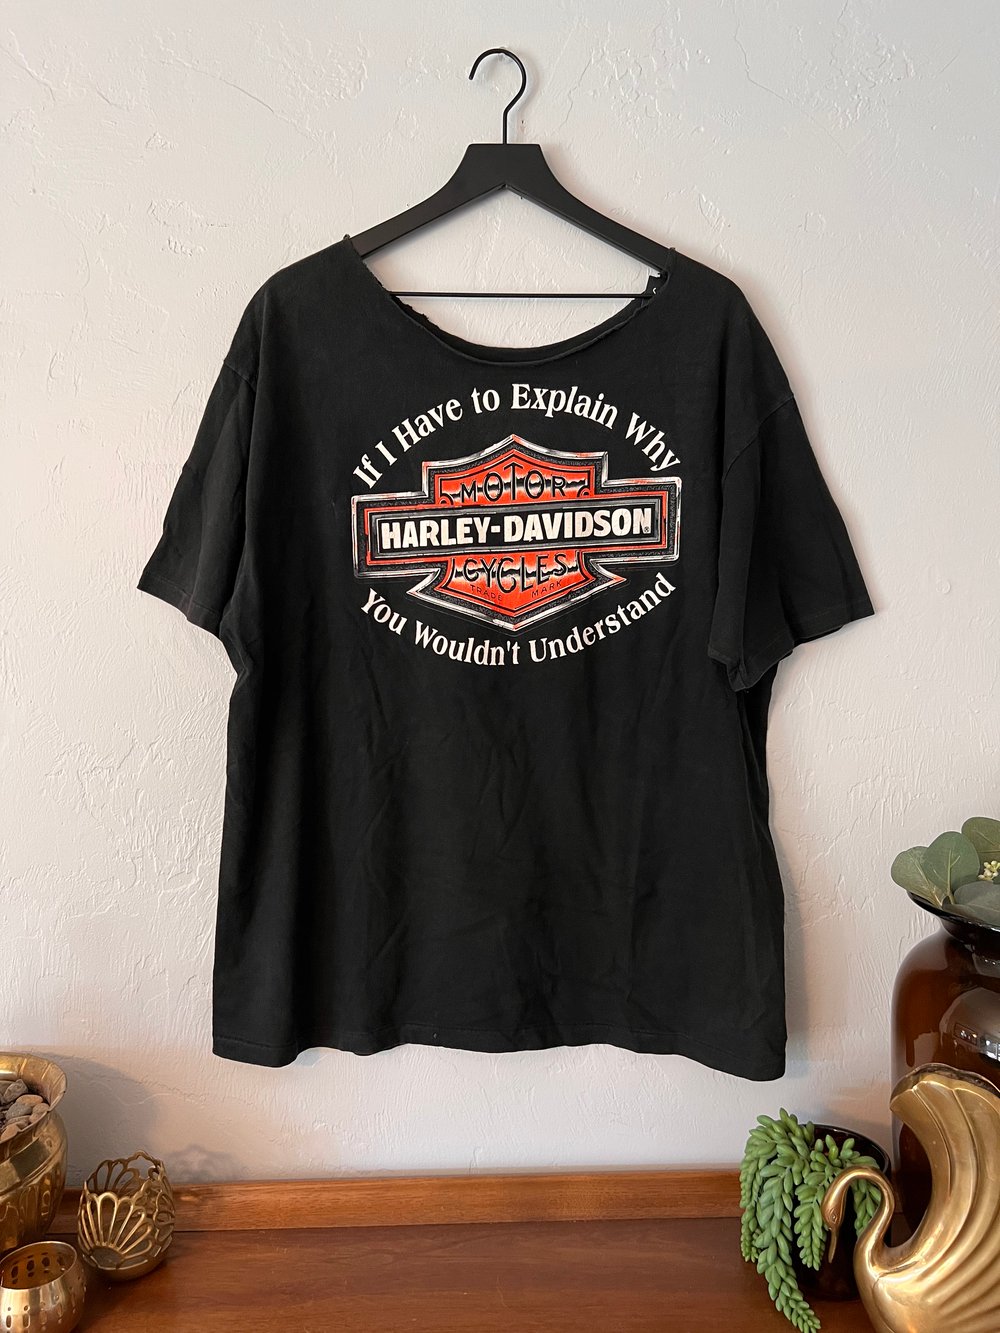 Vintage ‘If I Have to Explain’ Harley Tee (XL)